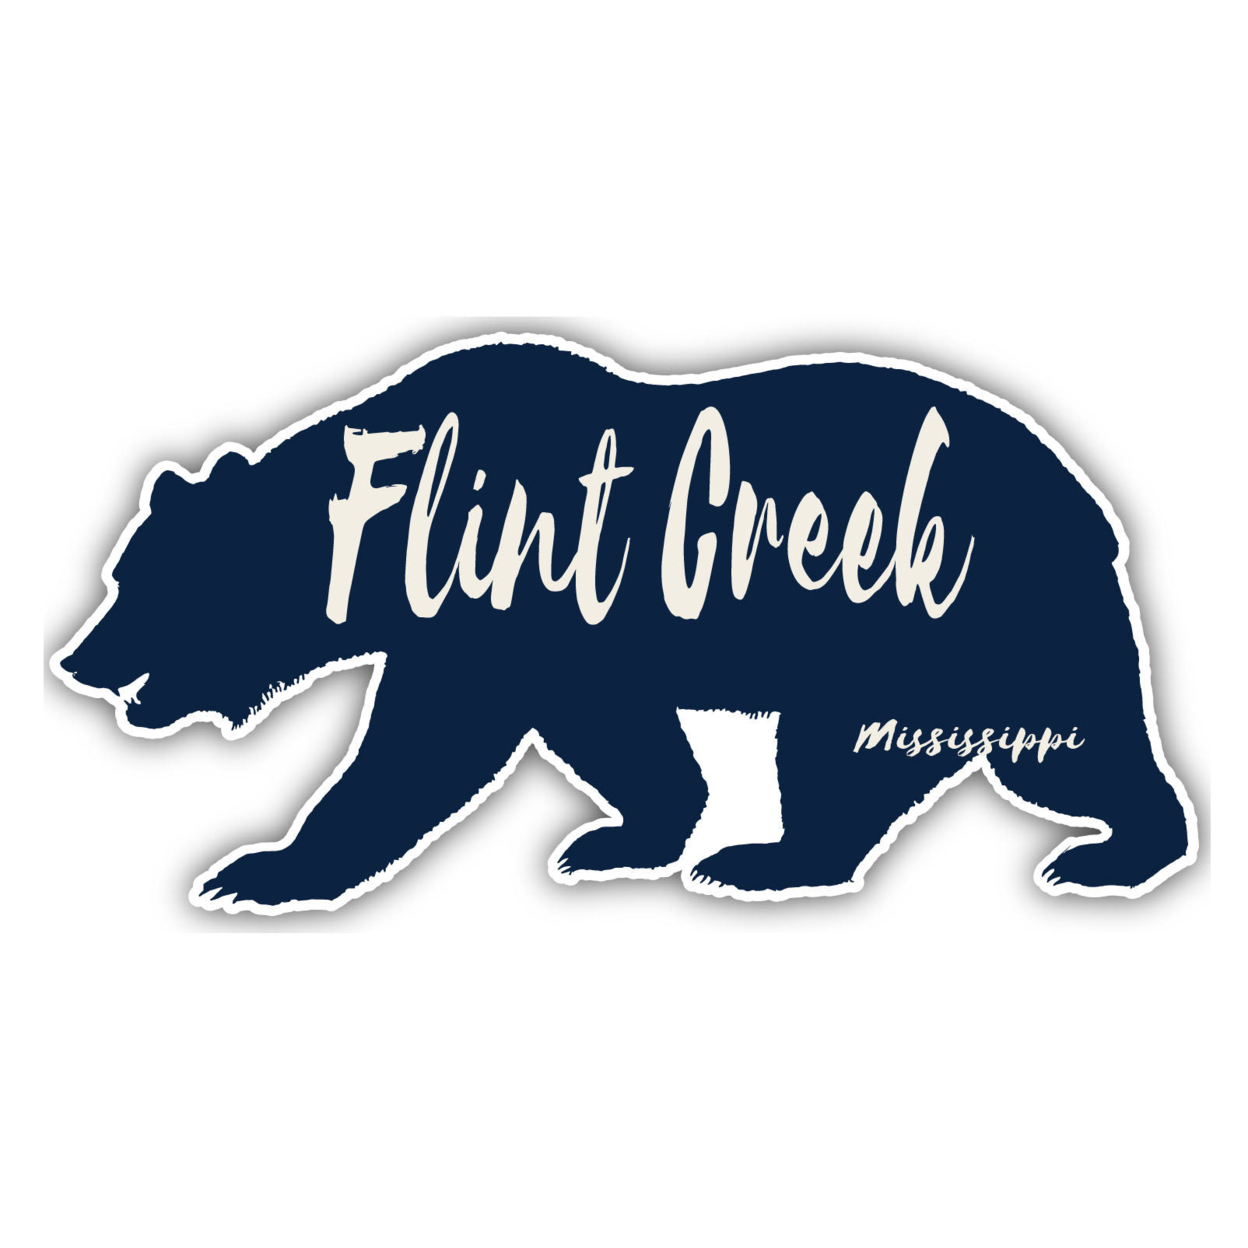 Flint Creek Mississippi Souvenir Decorative Stickers (Choose Theme And Size) - 4-Pack, 2-Inch, Bear